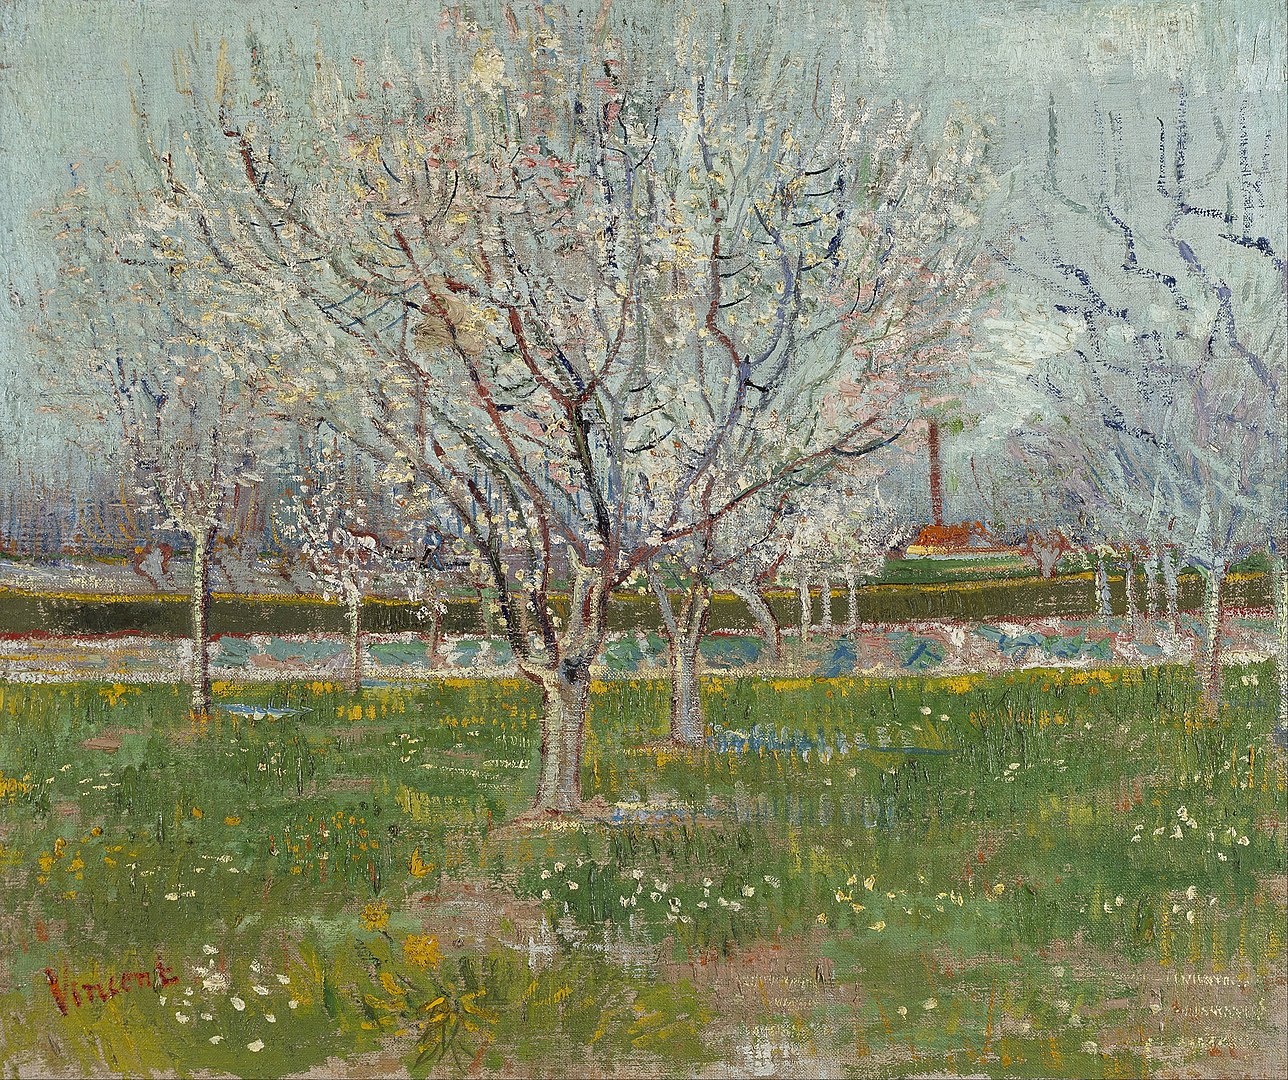 A landscape view of a forest of apricot trees